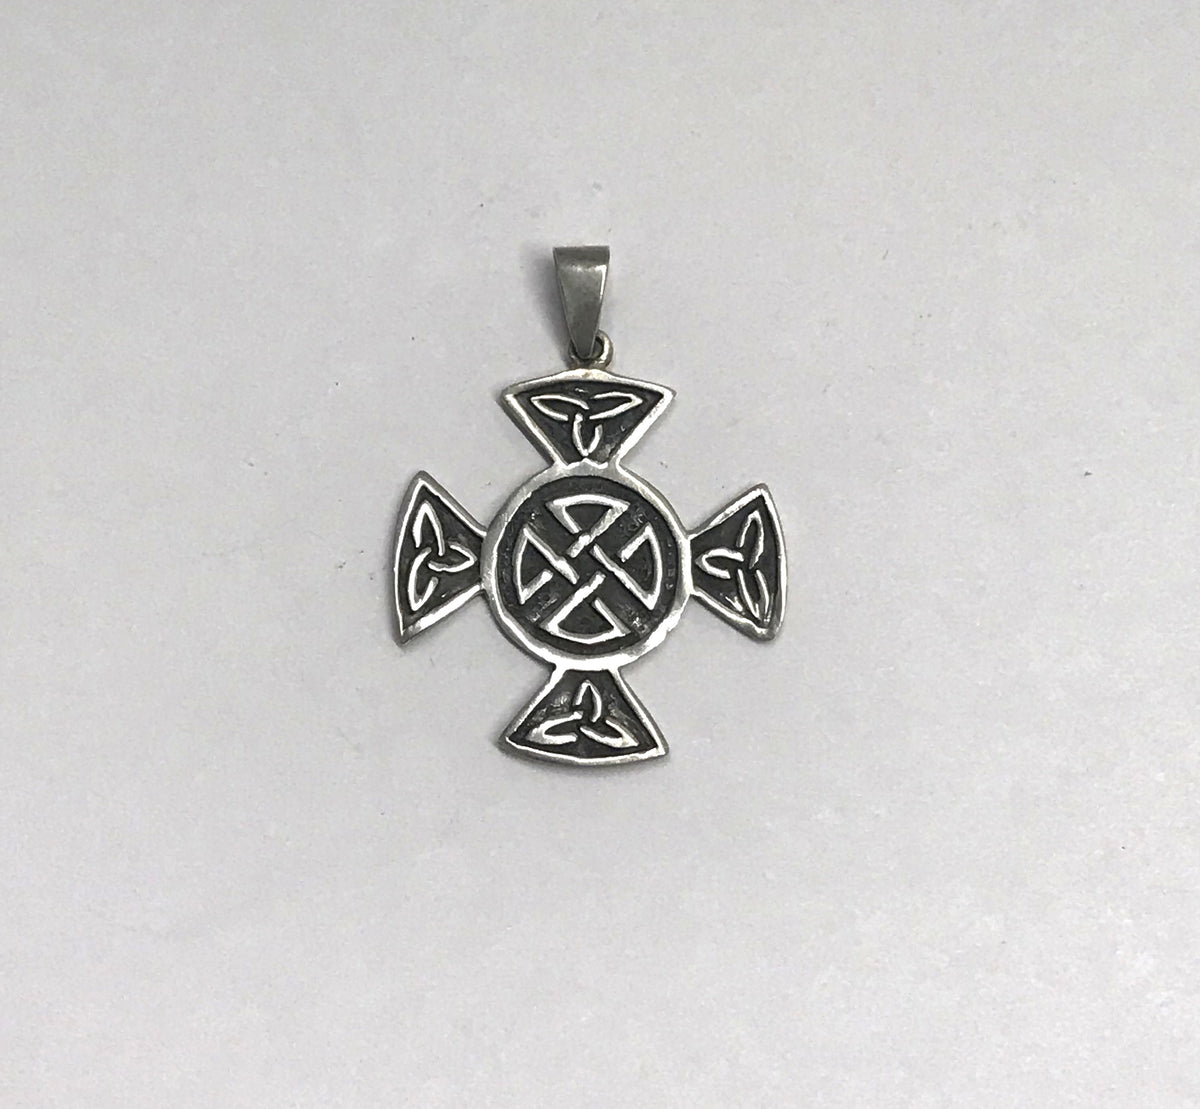 www.hersandhistreasures.com/products/Celtic-Cross-Trinity-Knot-Sterling-Silver-Necklace-Pendant